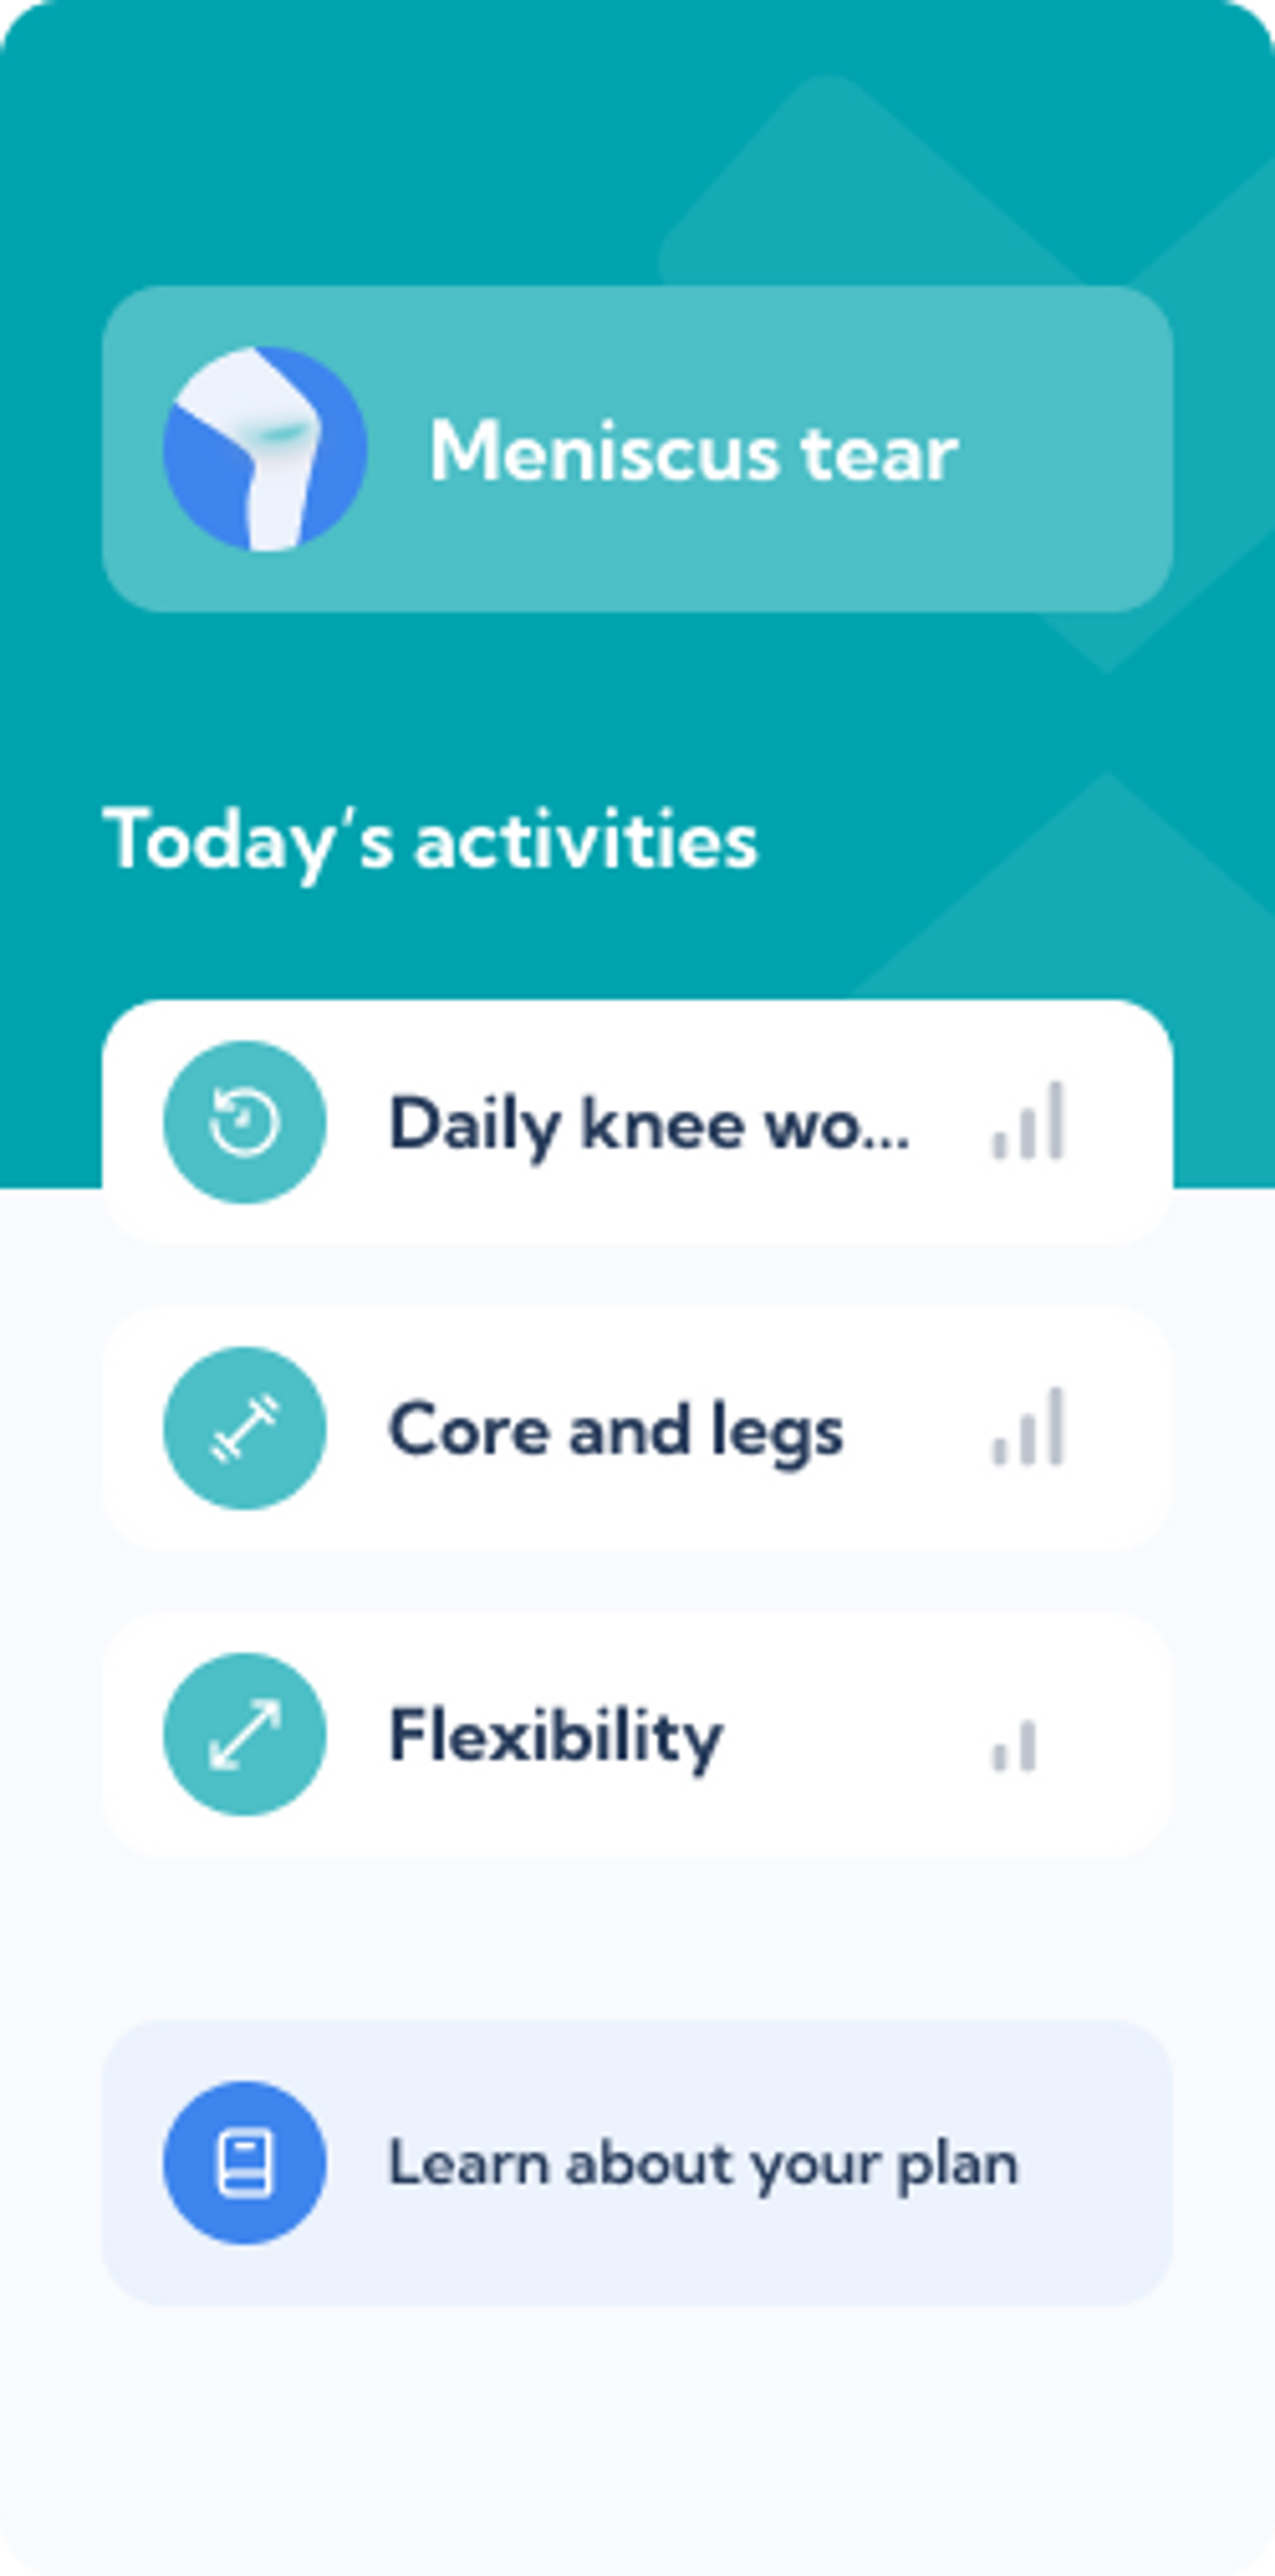 Meniscus tear treatment plan – Dashboard overview of the Exakt Health app